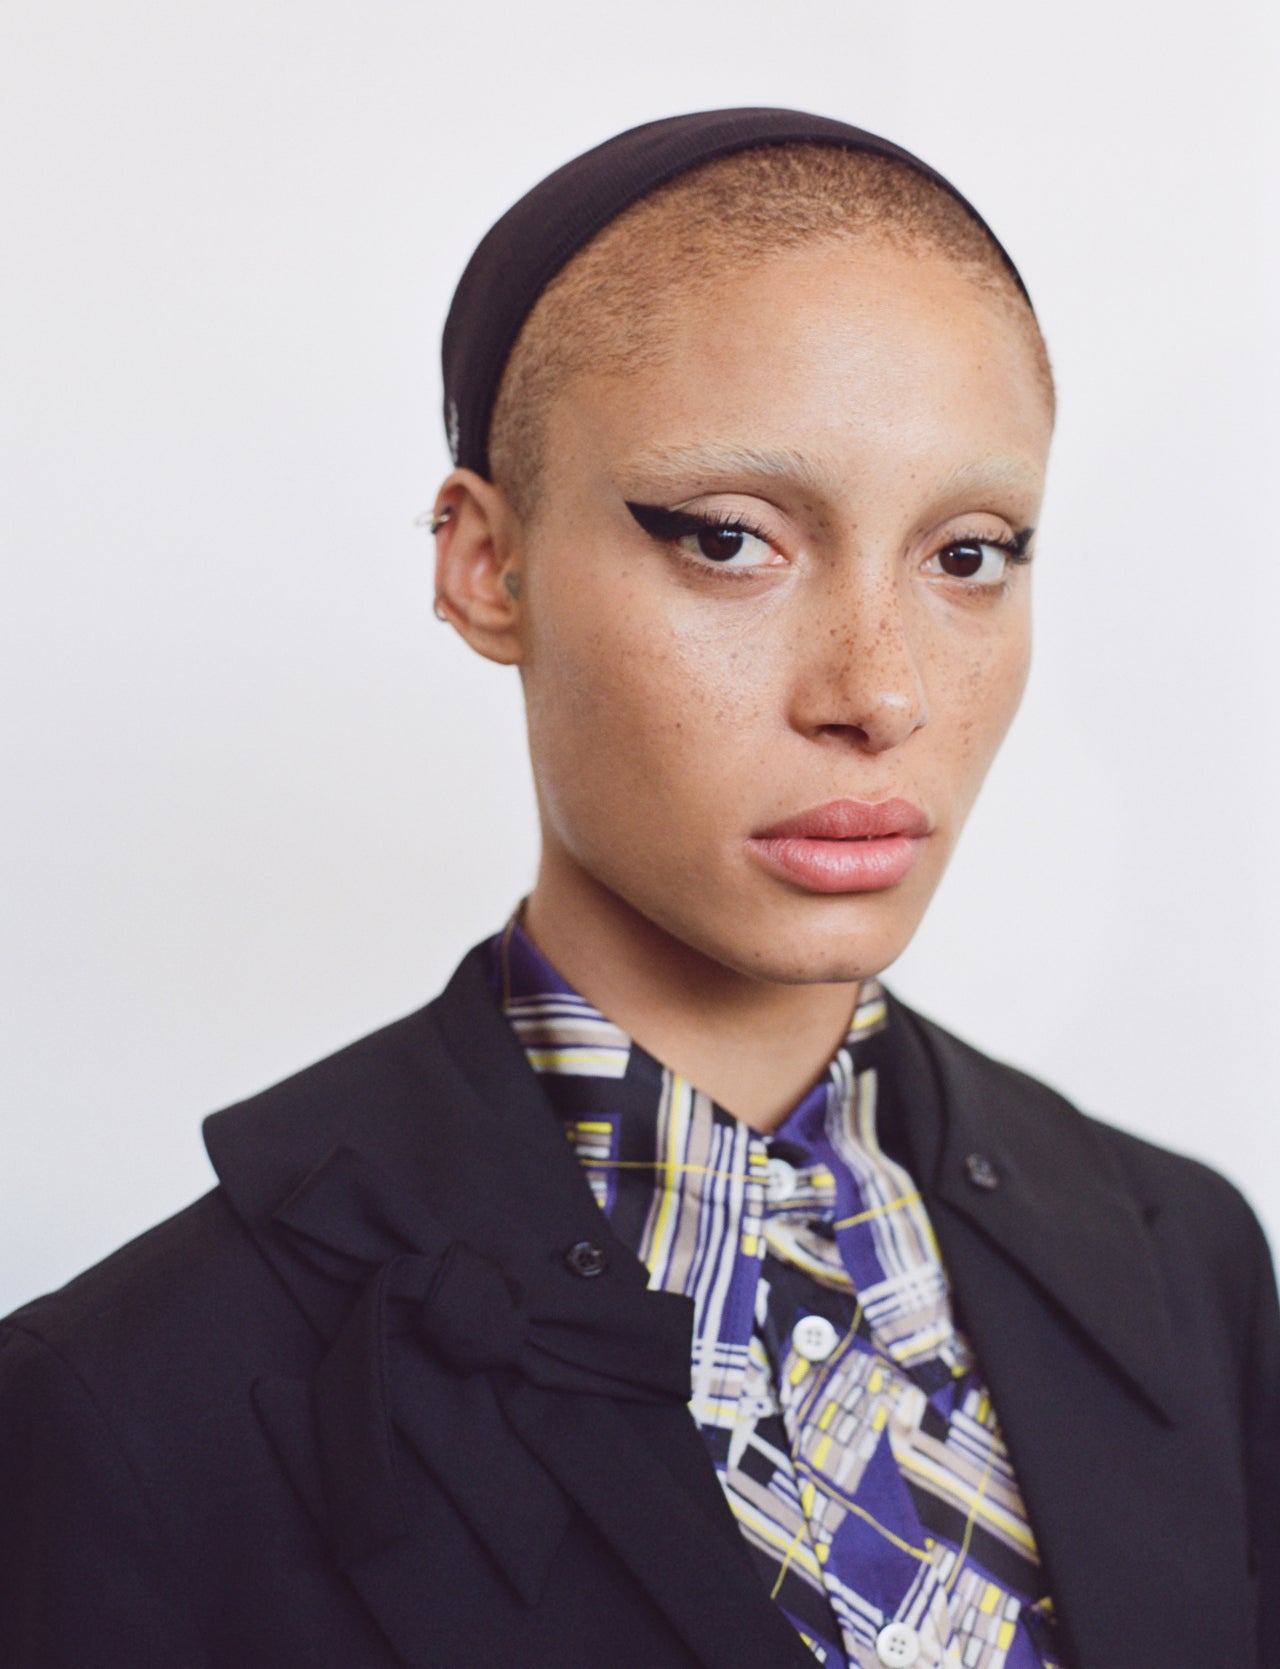 Supermodel And Activist Adwoa Aboah Talks Coping With Your Mental ...